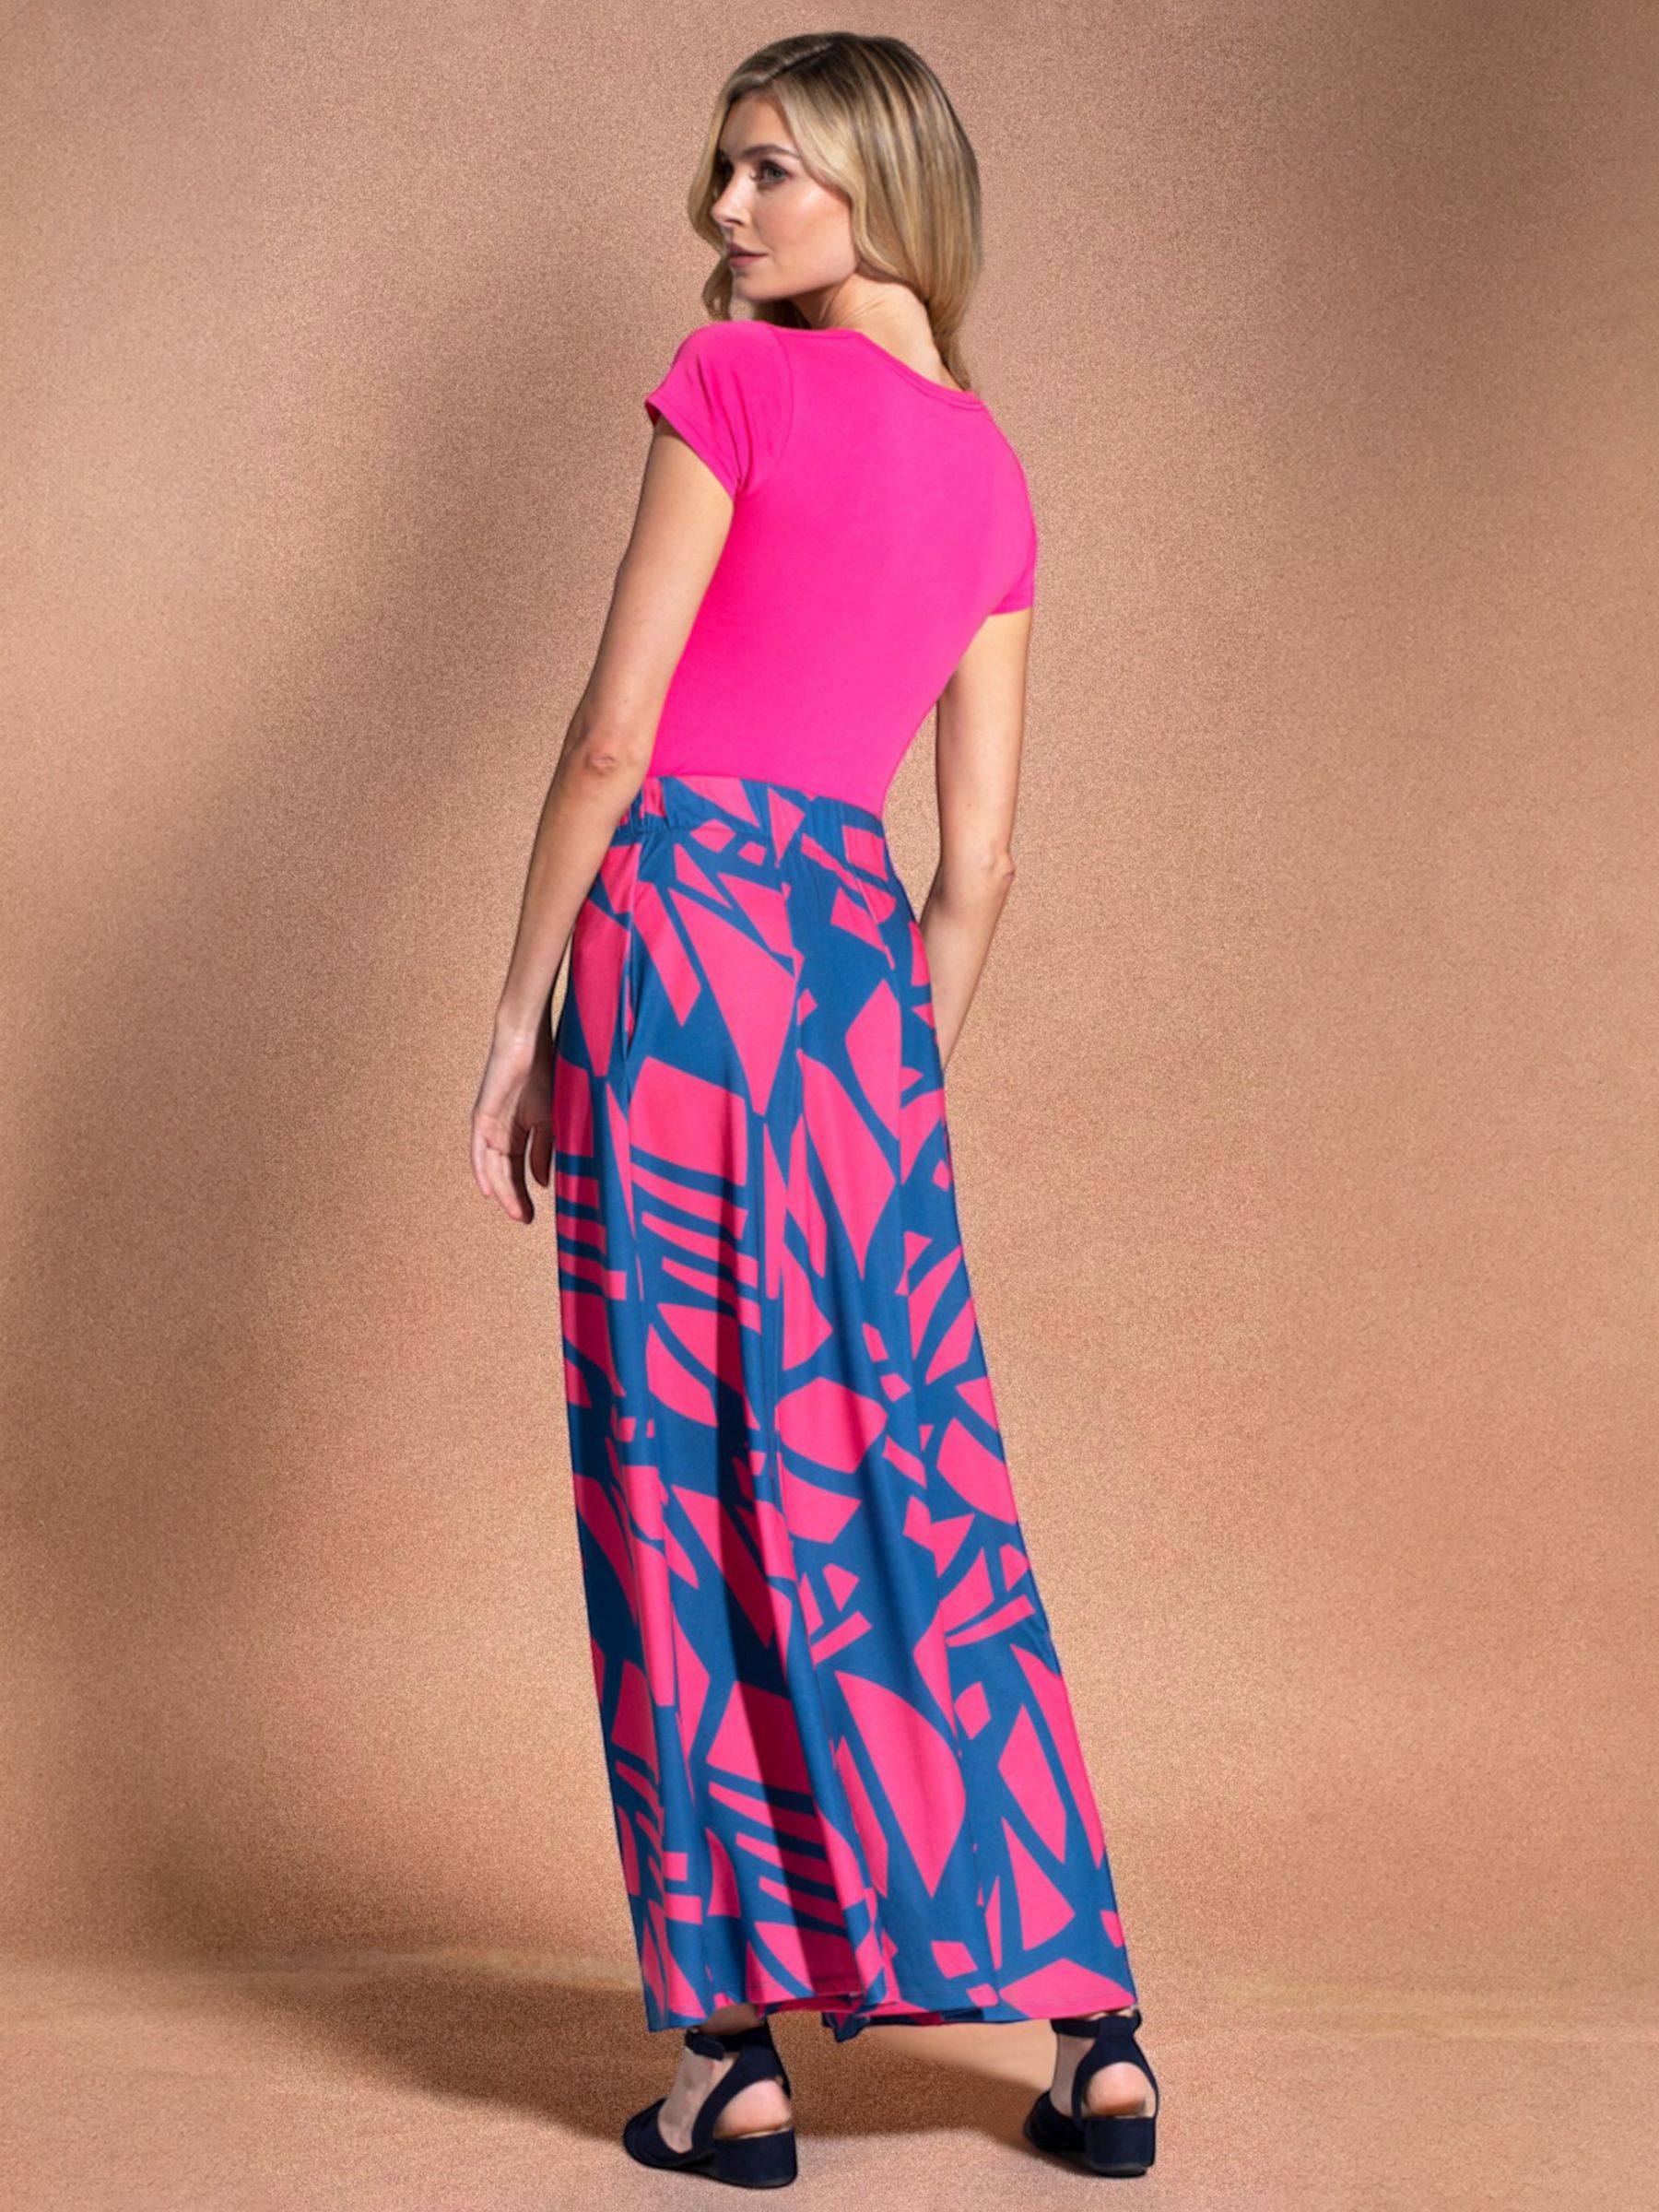 Buy HotSquash Abstract Box Pleat Maxi Skirt, Matisse Teal/Pink Online at johnlewis.com